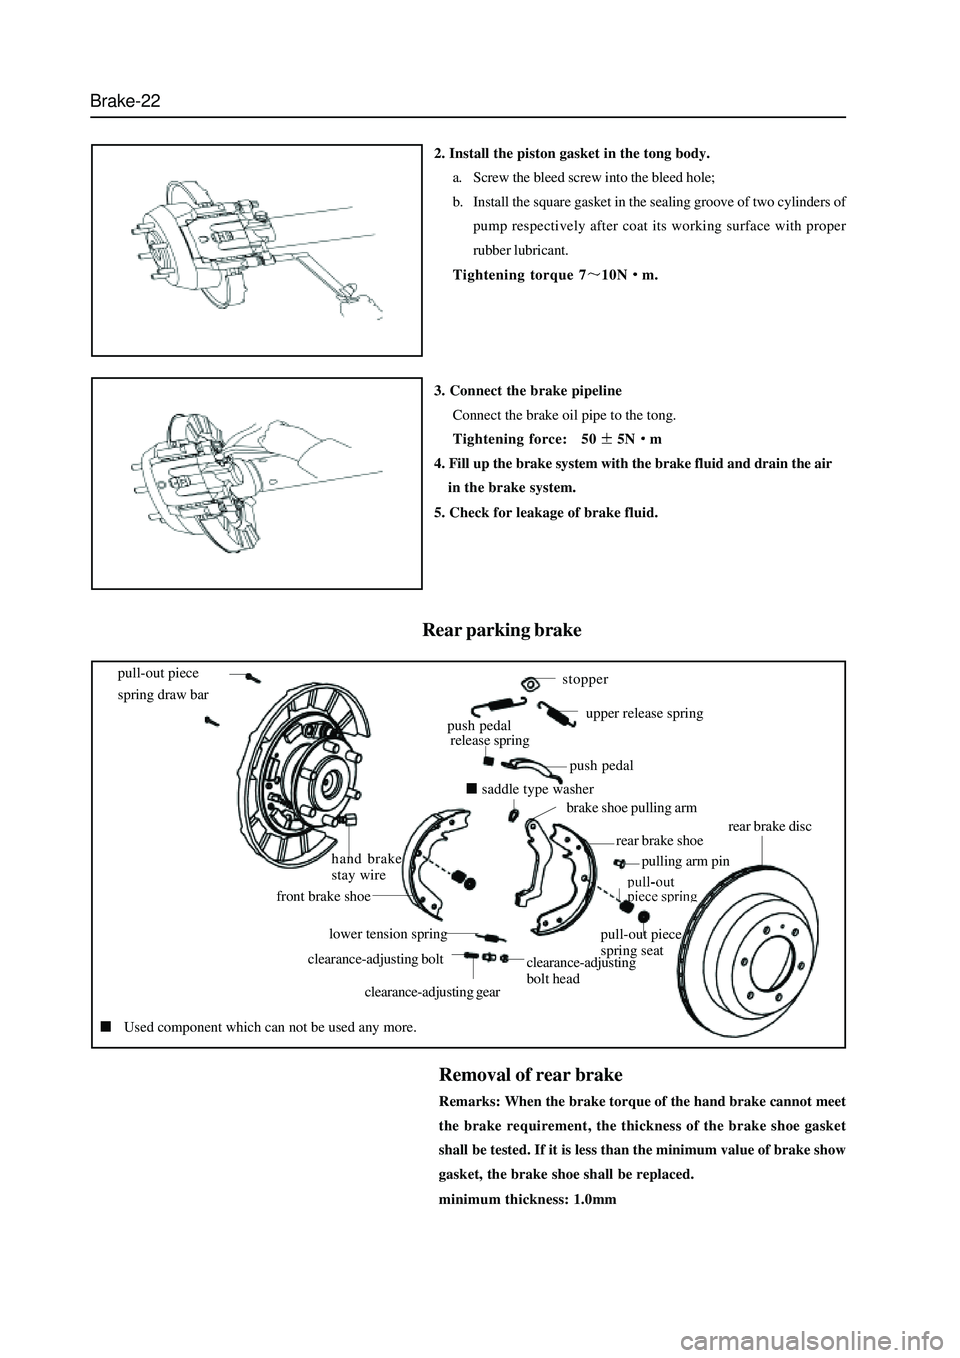 GREAT WALL HOVER 2006  Service Repair Manual Brake-22
2. Install the piston gasket in the tong body.
a. Screw the bleed screw into the bleed hole;
b. Install the square gasket in the sealing groove of two cylinders of
pump respectively after coa